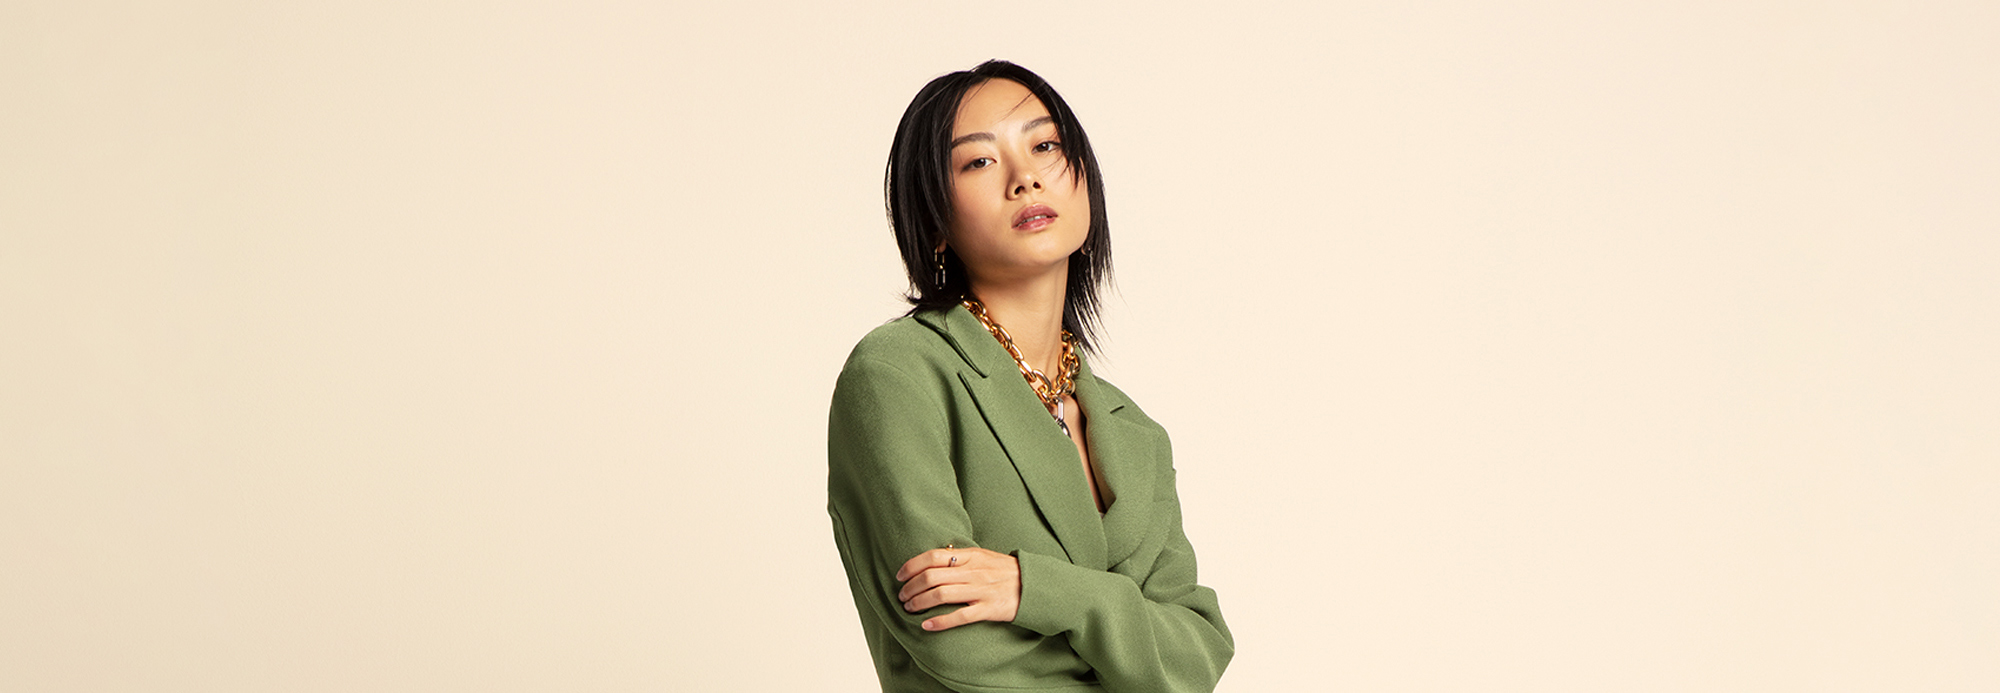 A stylish young woman wearing a green blazer and chunky gold chain necklace